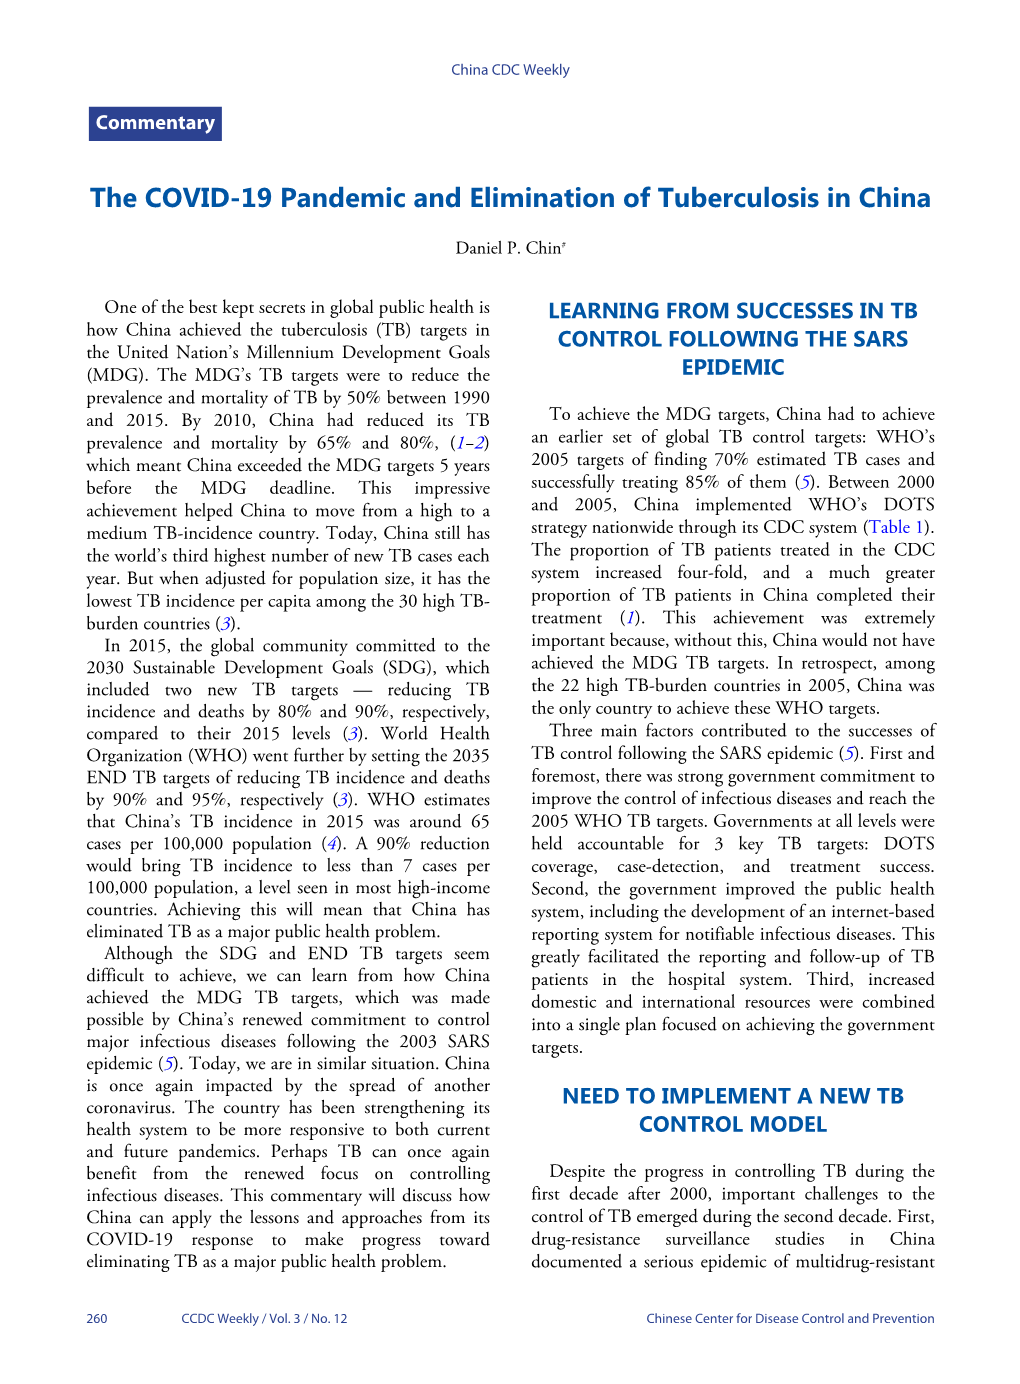 The COVID-19 Pandemic and Elimination of Tuberculosis in China